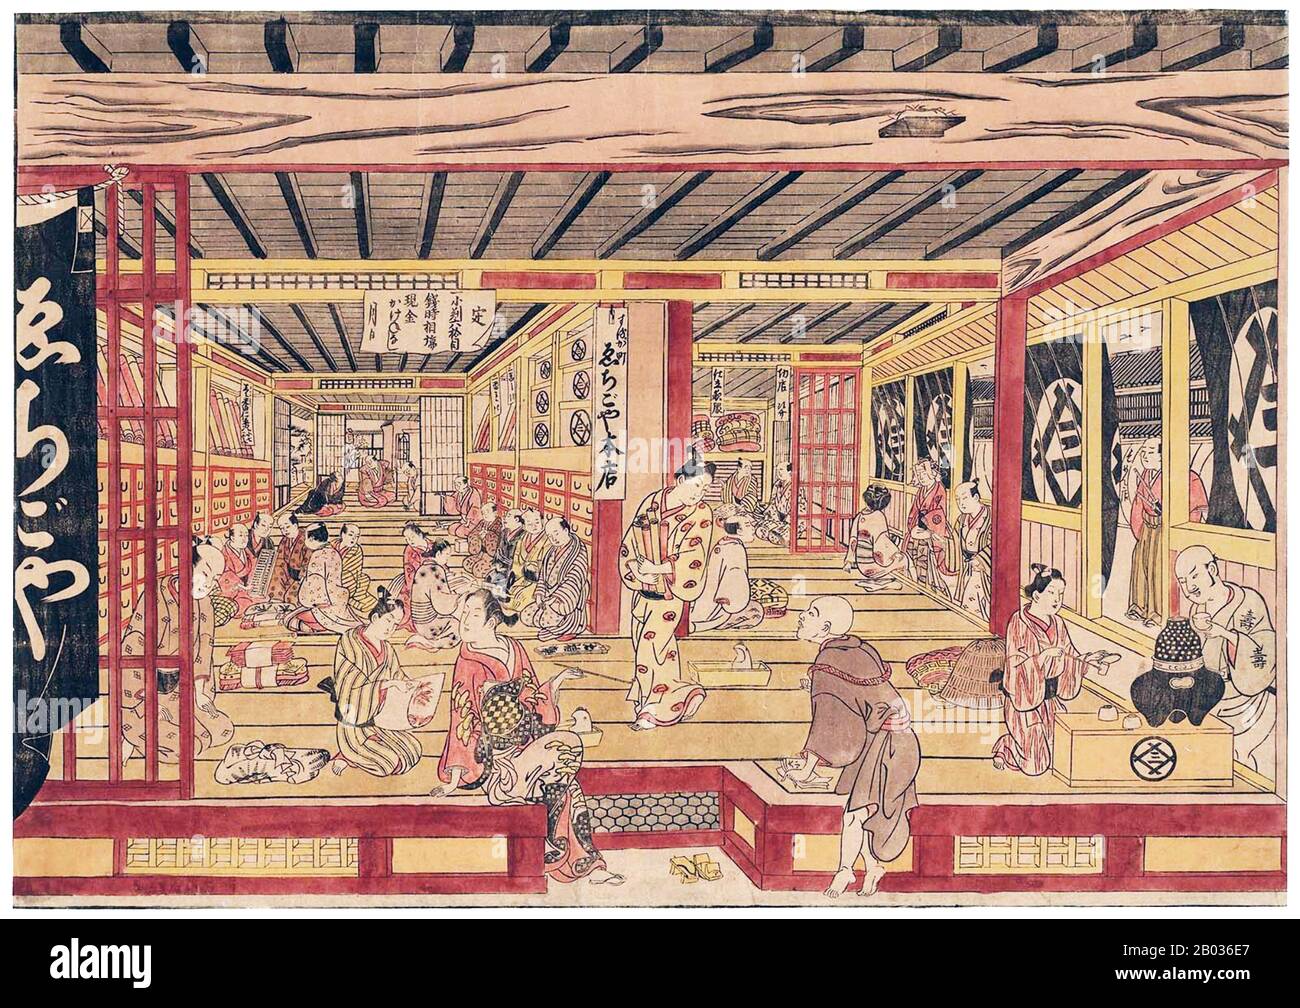 Okumura Masanobu (1686 – 13 March 1764) was a Japanese print designer, book publisher, and painter. He also illustrated novelettes and in his early years wrote some fiction.  At first his work adhered to the Torii school, but later drifted beyond that. He is a figure in the formative era of ukiyo-e doing early works on actors and bijin-ga ('pictures of beautiful women'). Stock Photo